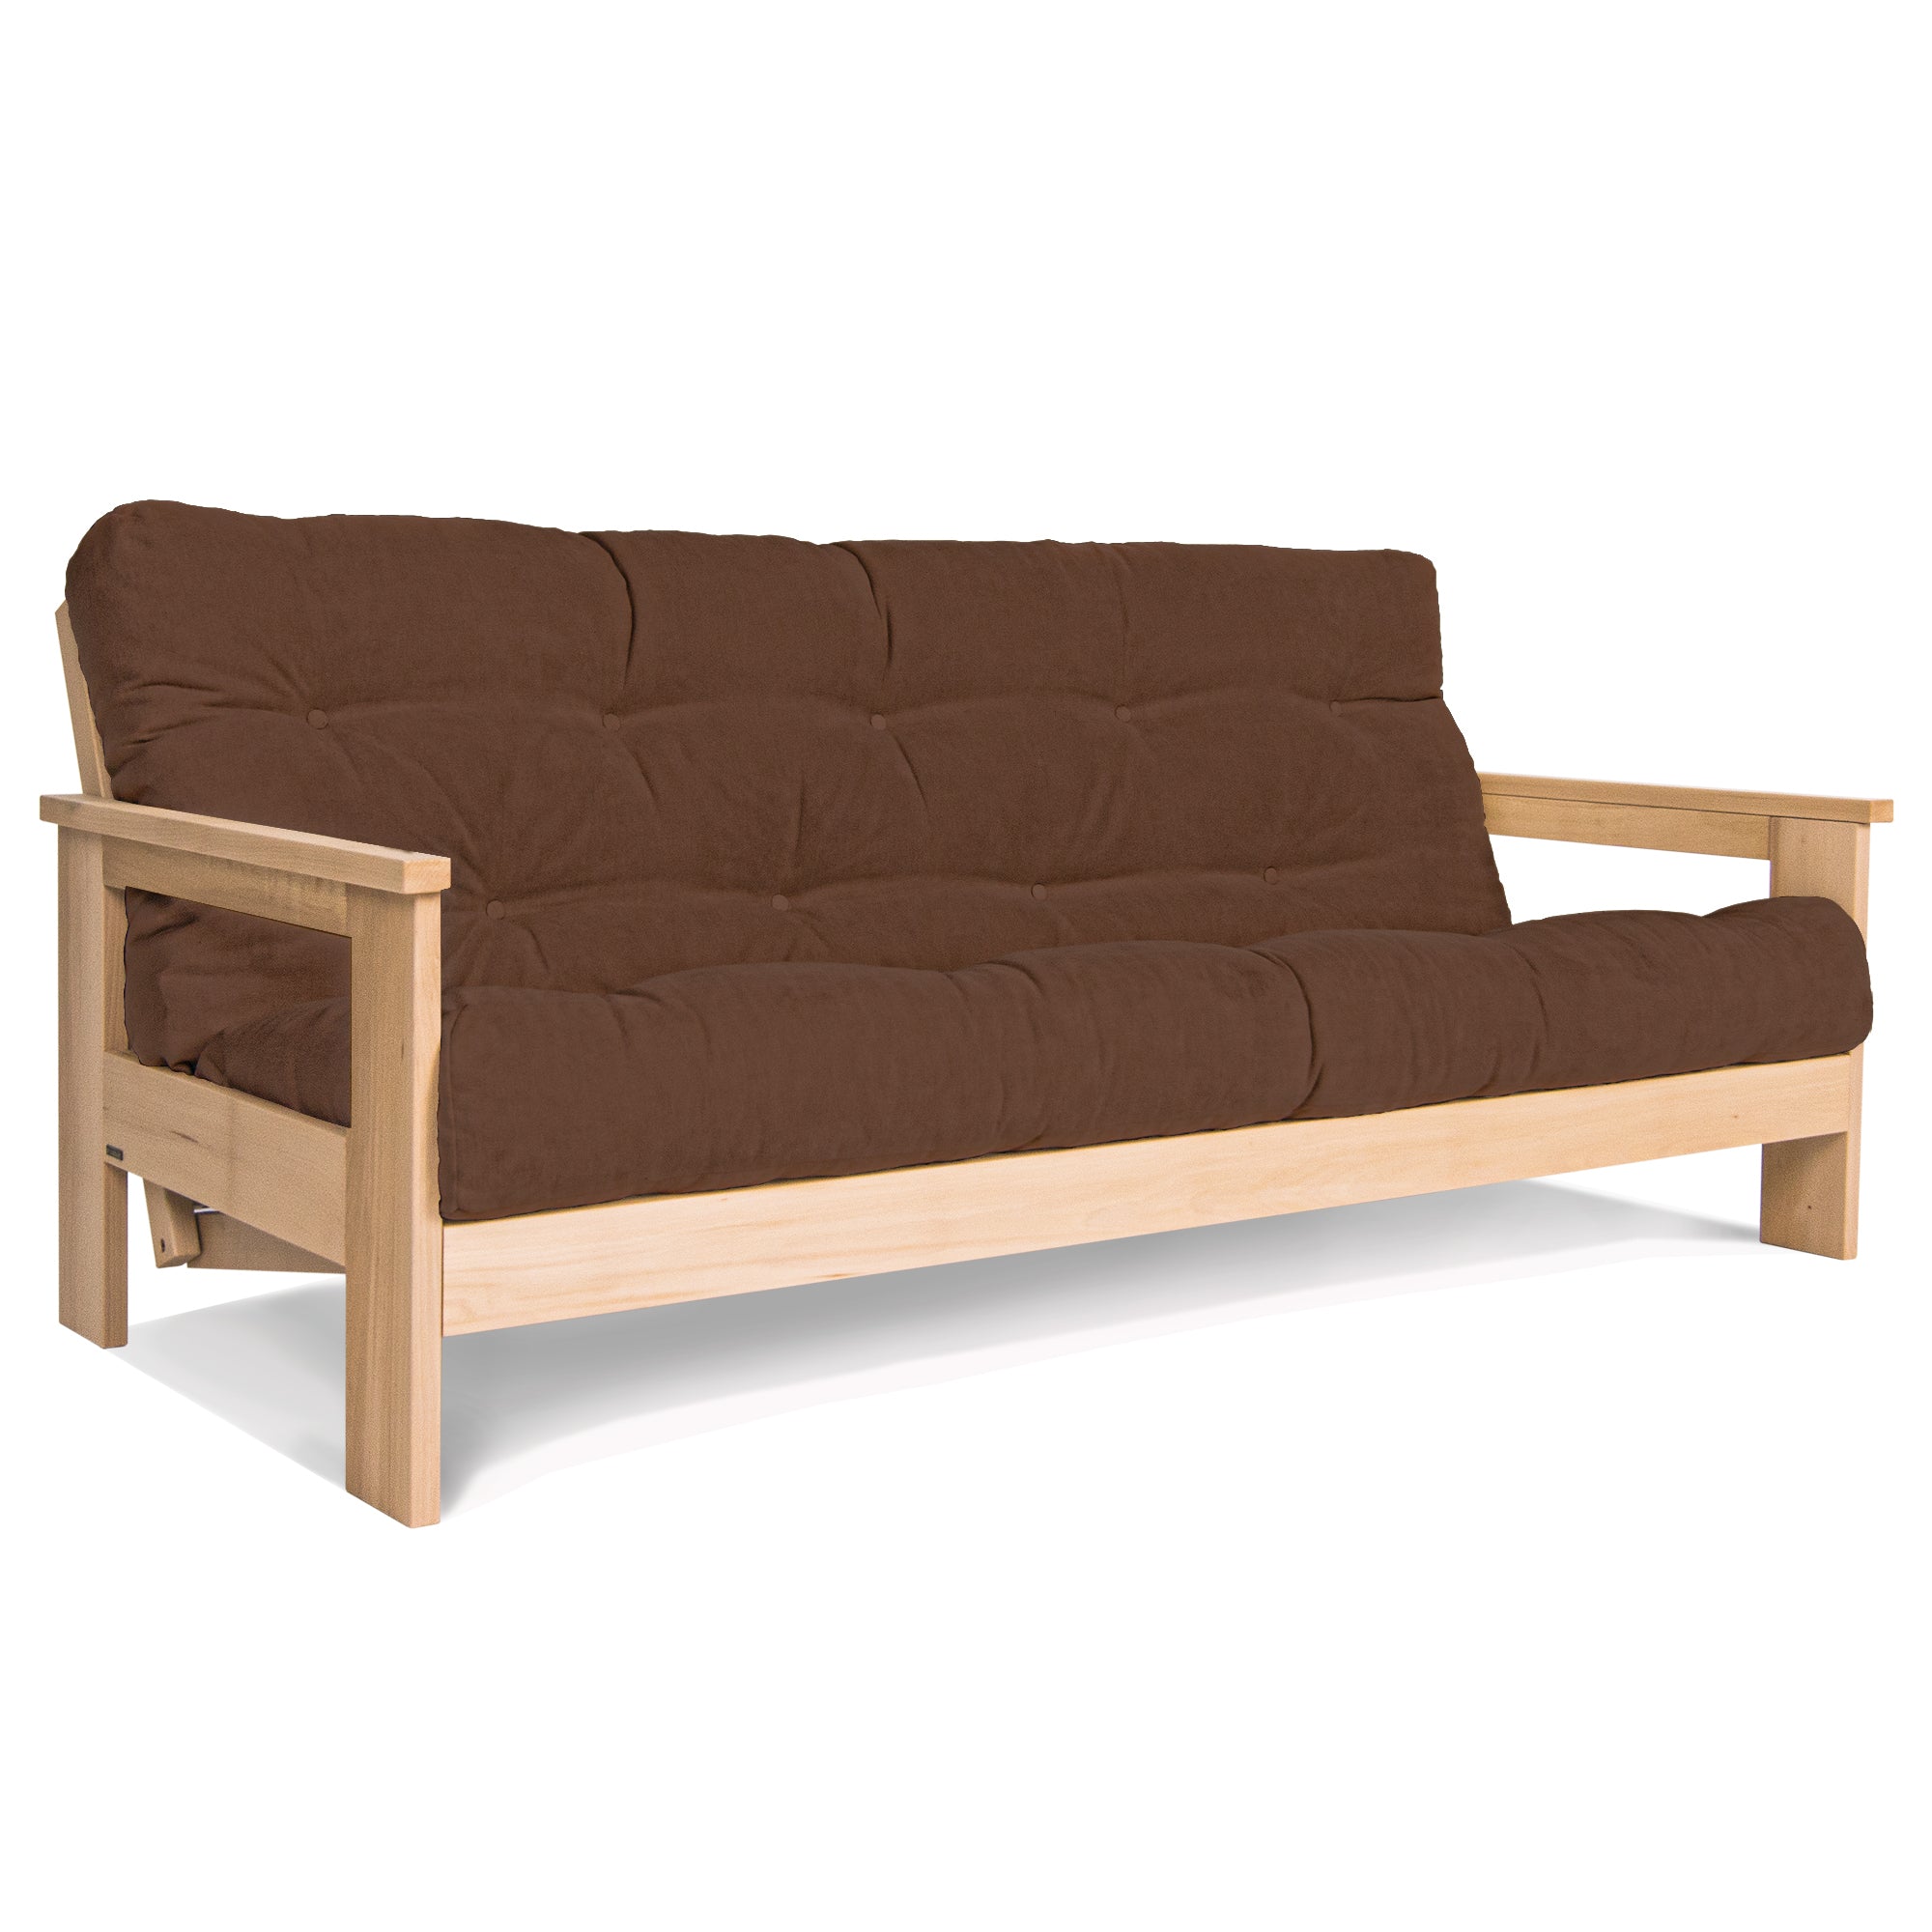 MEXICO Folding Sofa Bed-Beech Wood Frame-Natural Colour-brown fabric